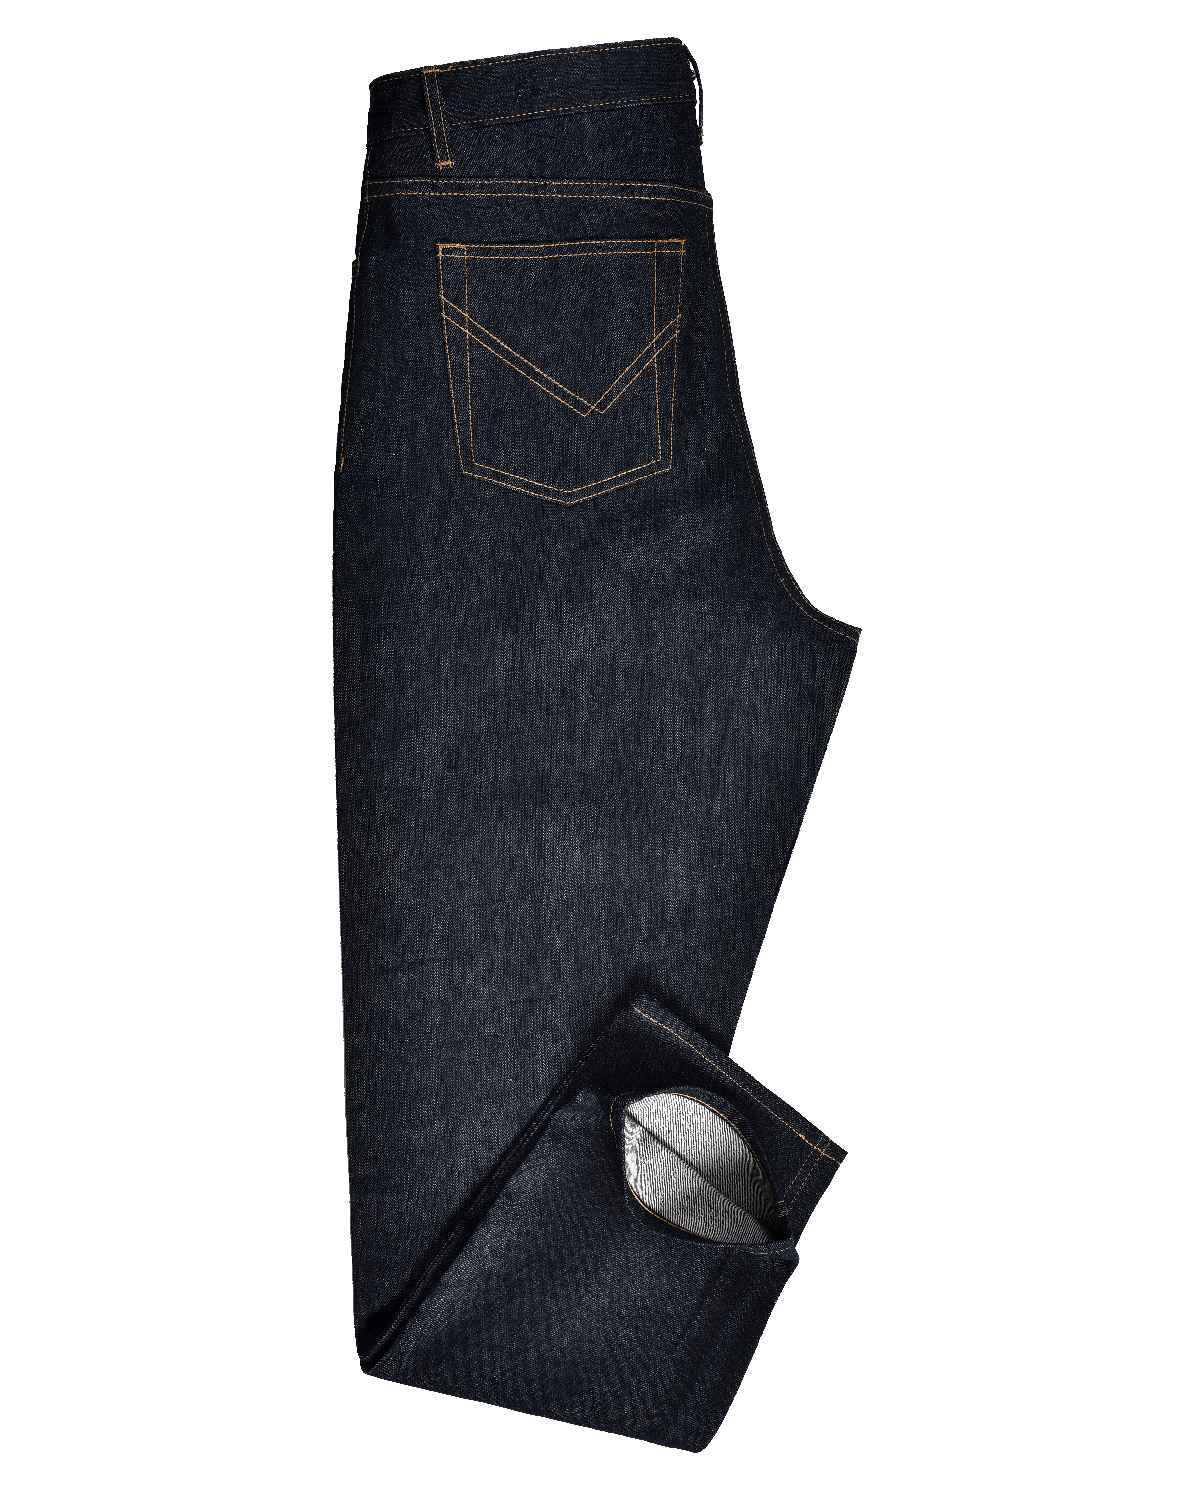 Side view of mens Japanese Kaihara jeans by Luxire in indigo 2